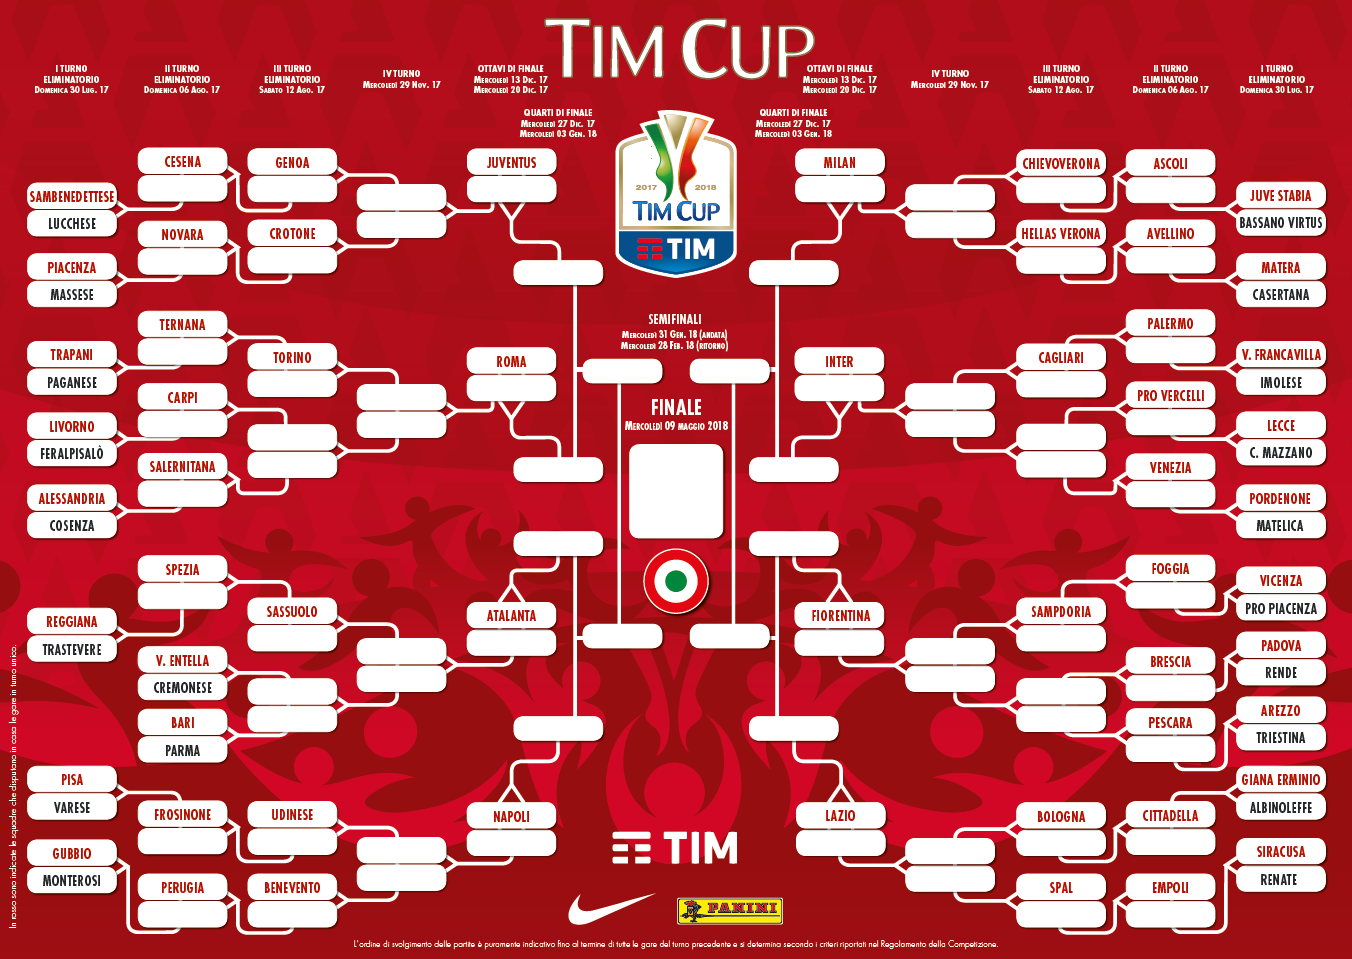 tabellone_tim_cup_17-18